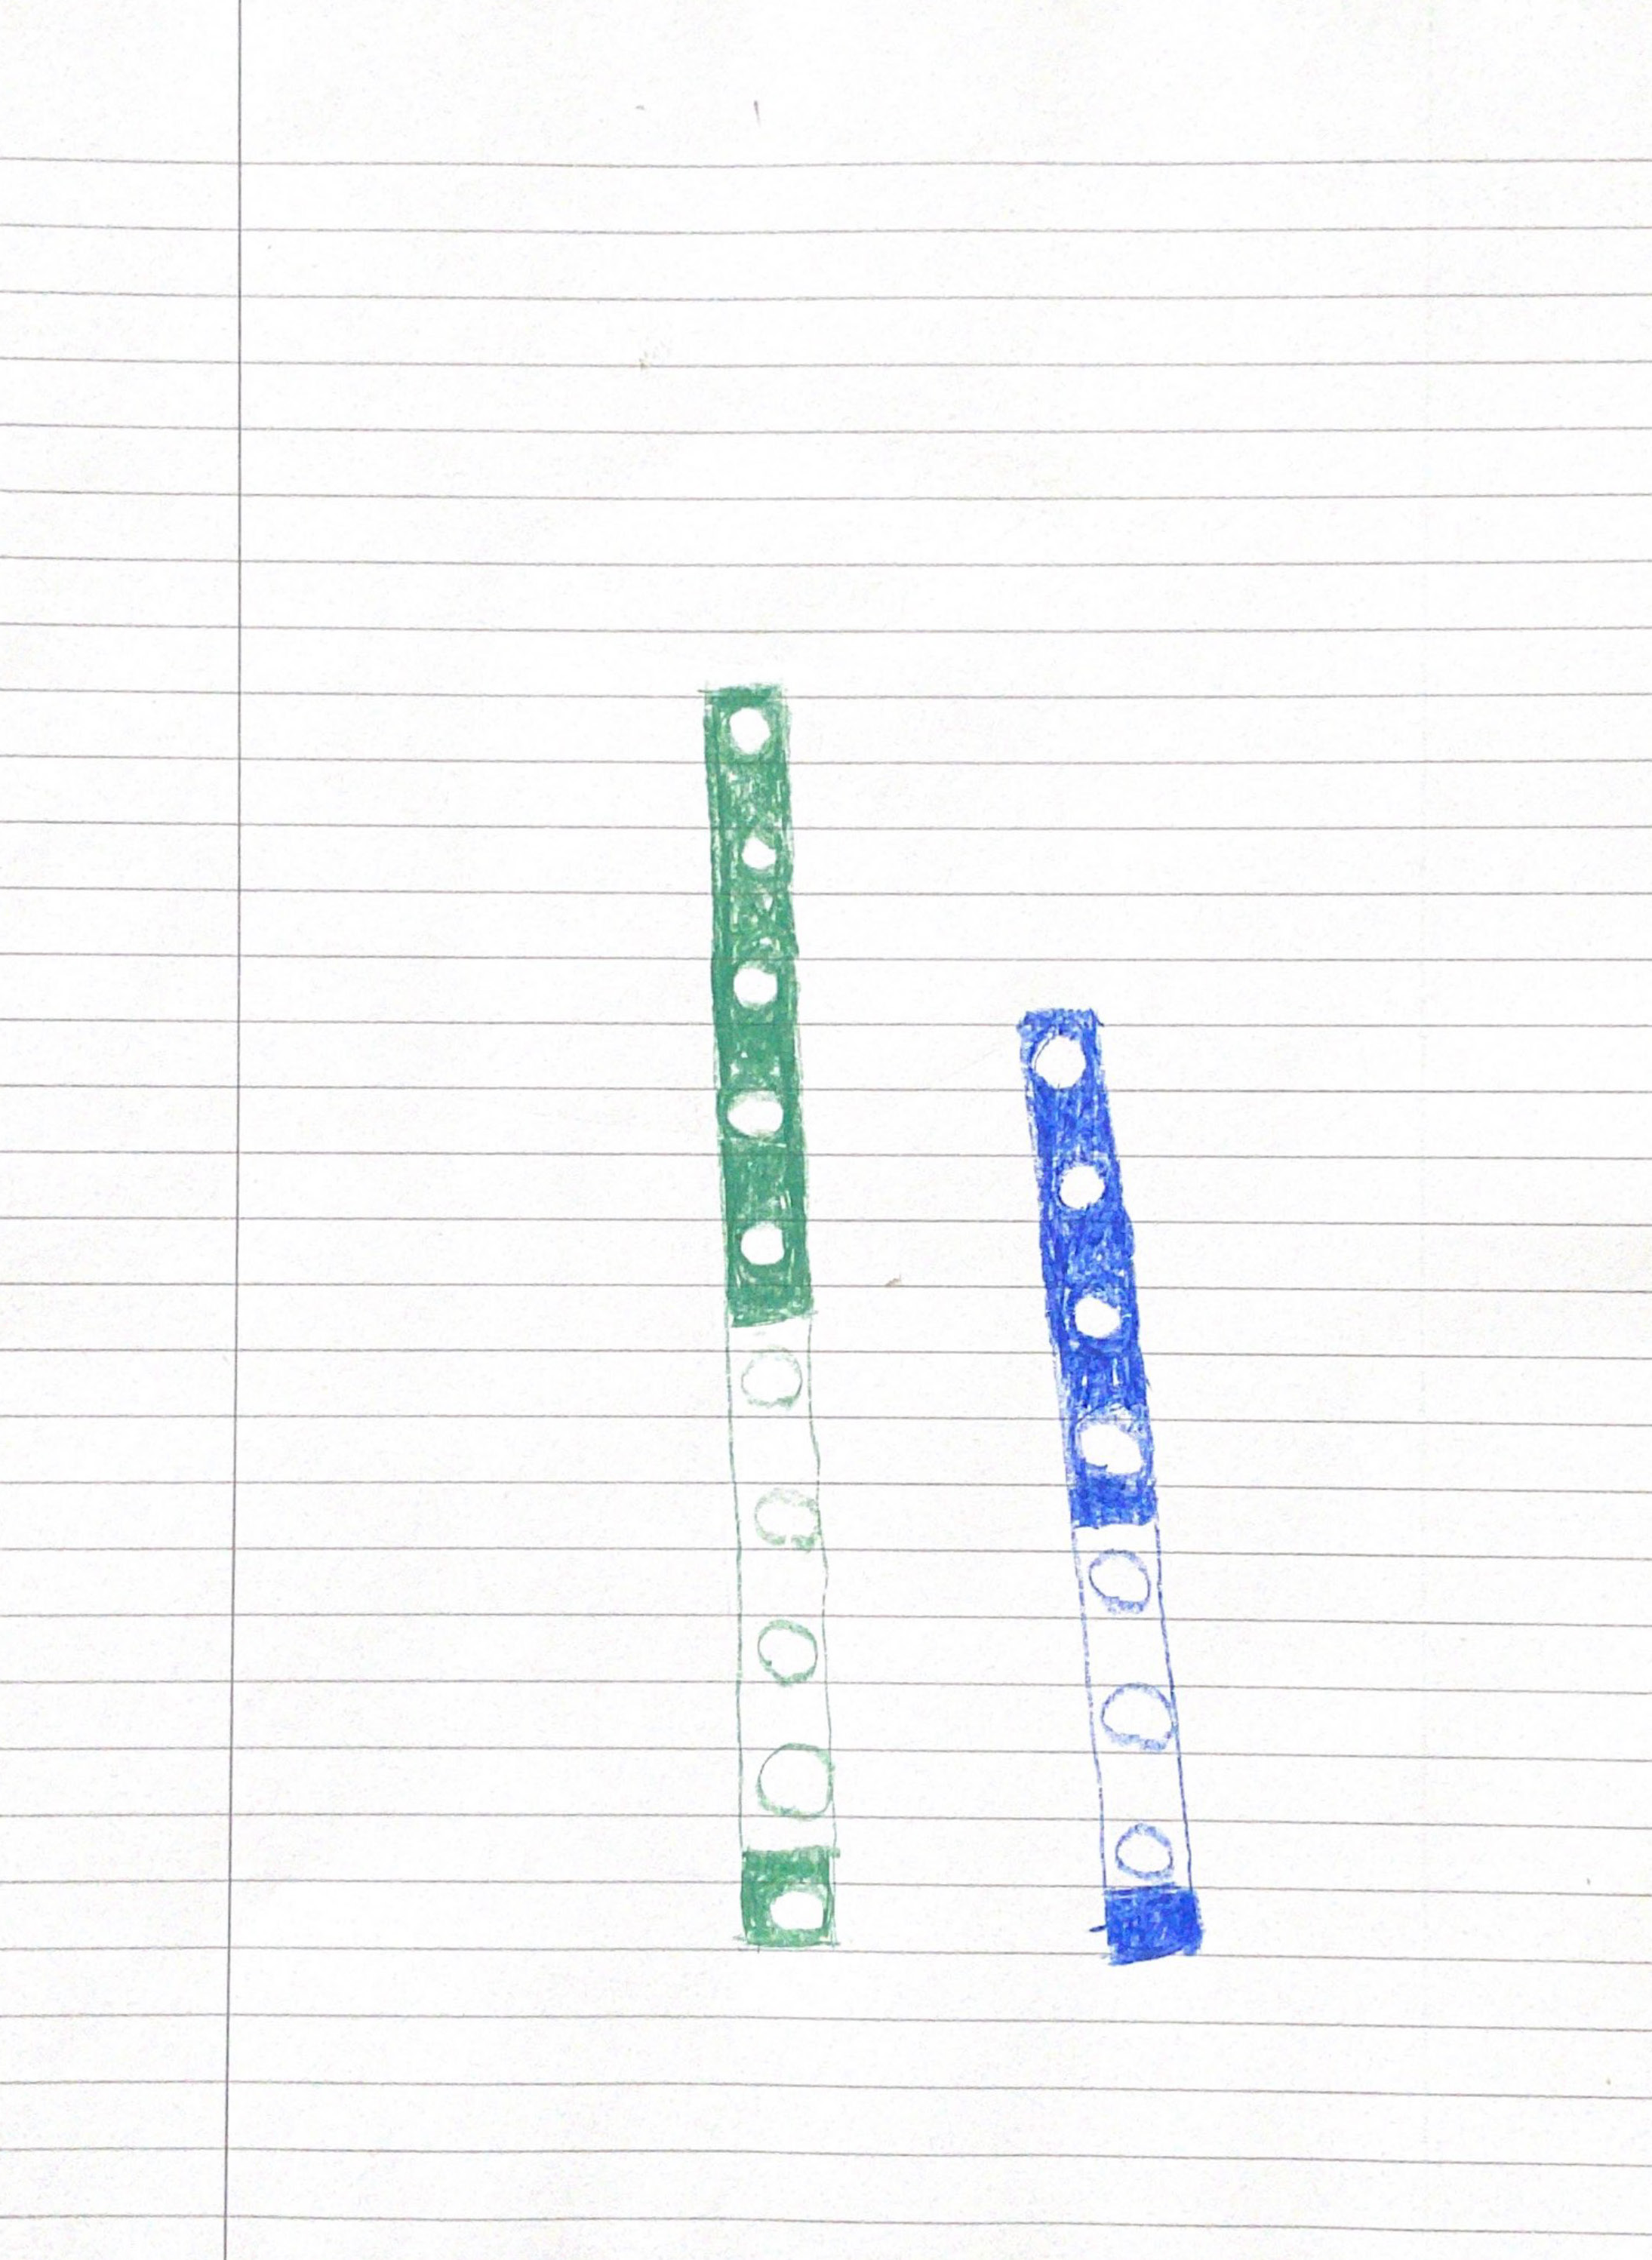 two small poles with holes in them are drawn in blue and green colored pencils